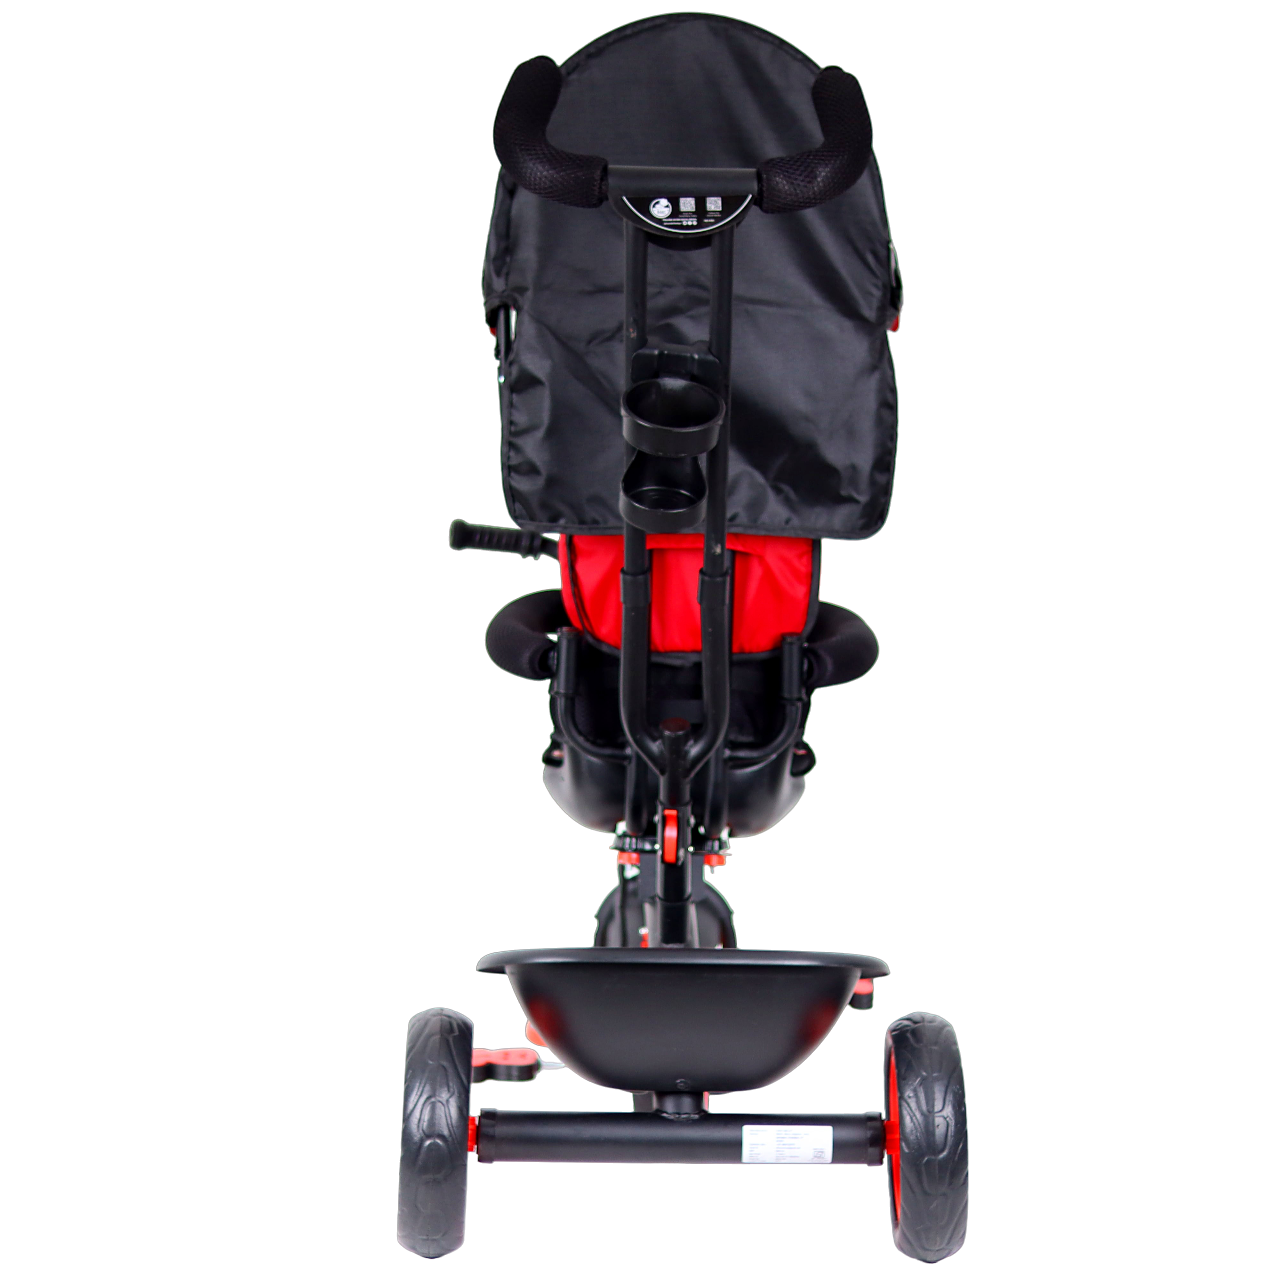 Luusa XR09 Hooded Tricycle for Kids - Ages 8 Months to 4 Years